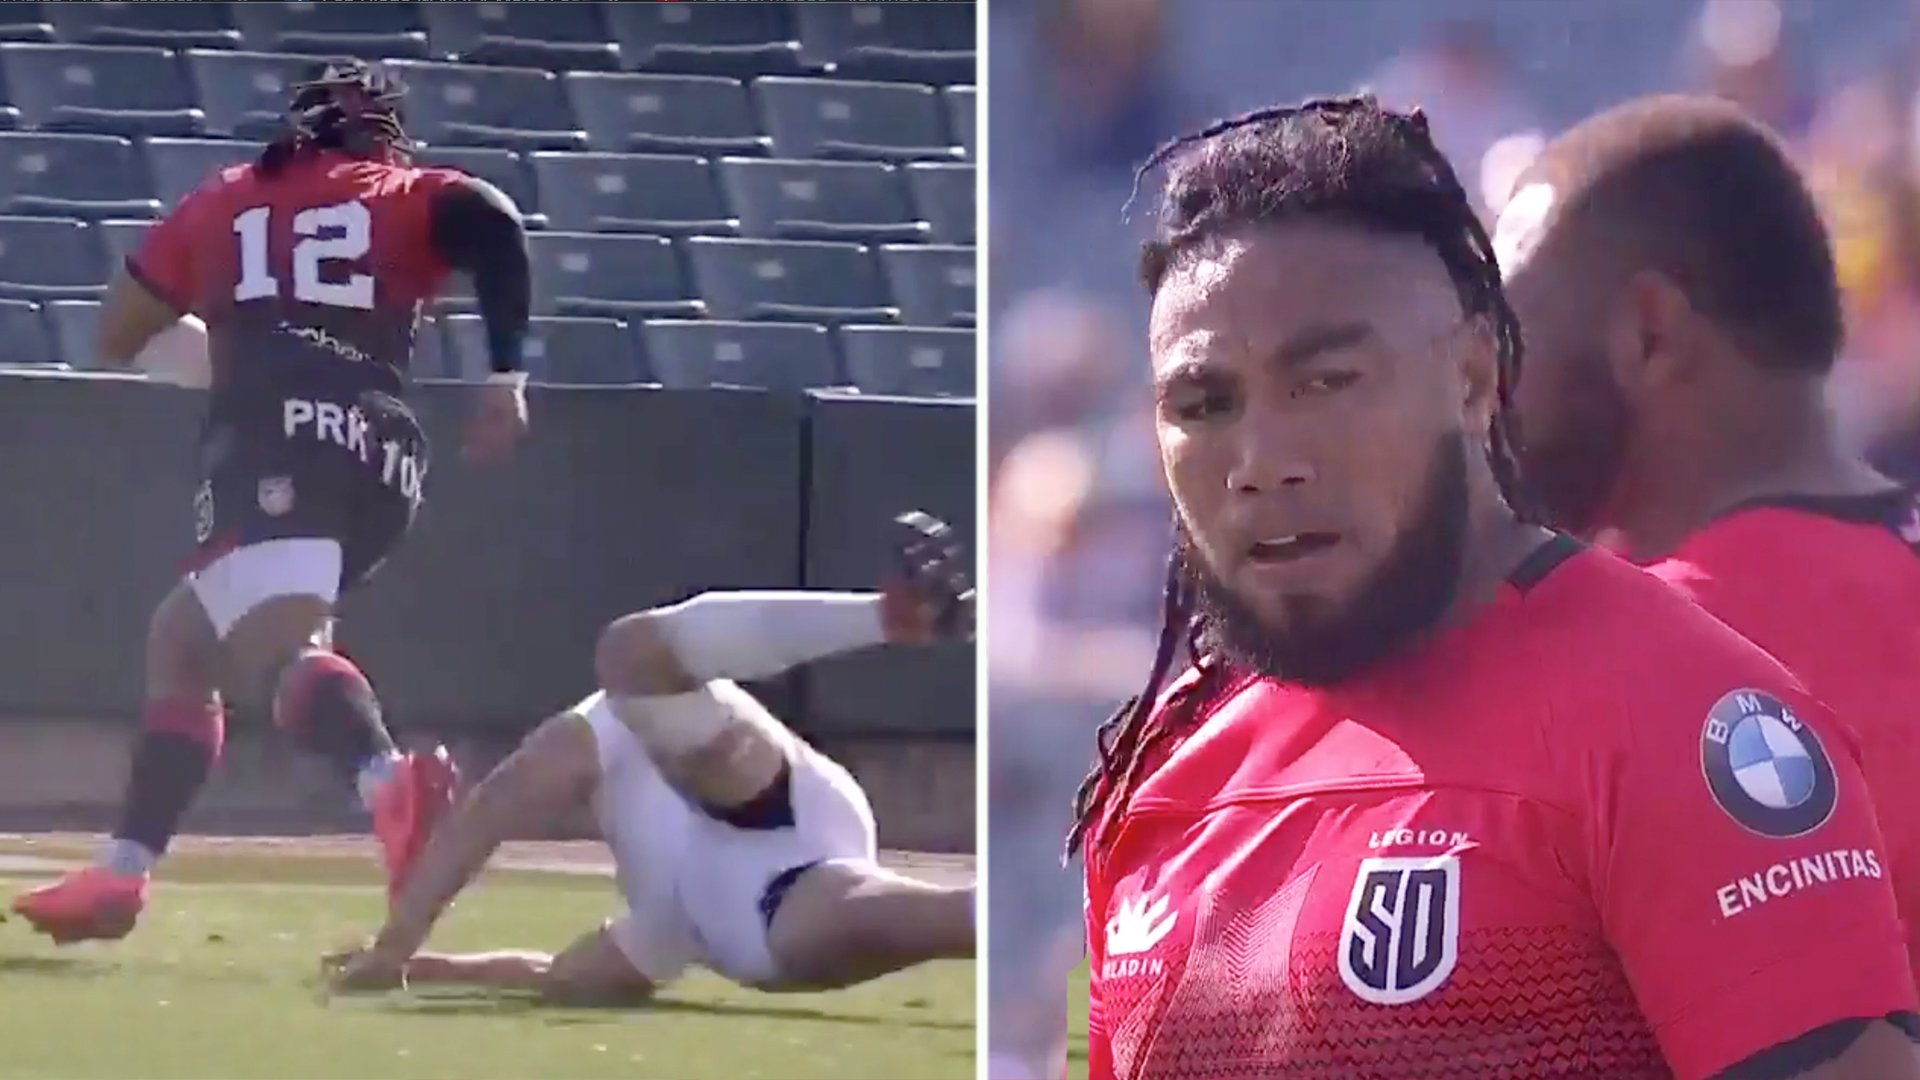 Ma'a Nonu scores yet another sensational try in the MLR for San Diego